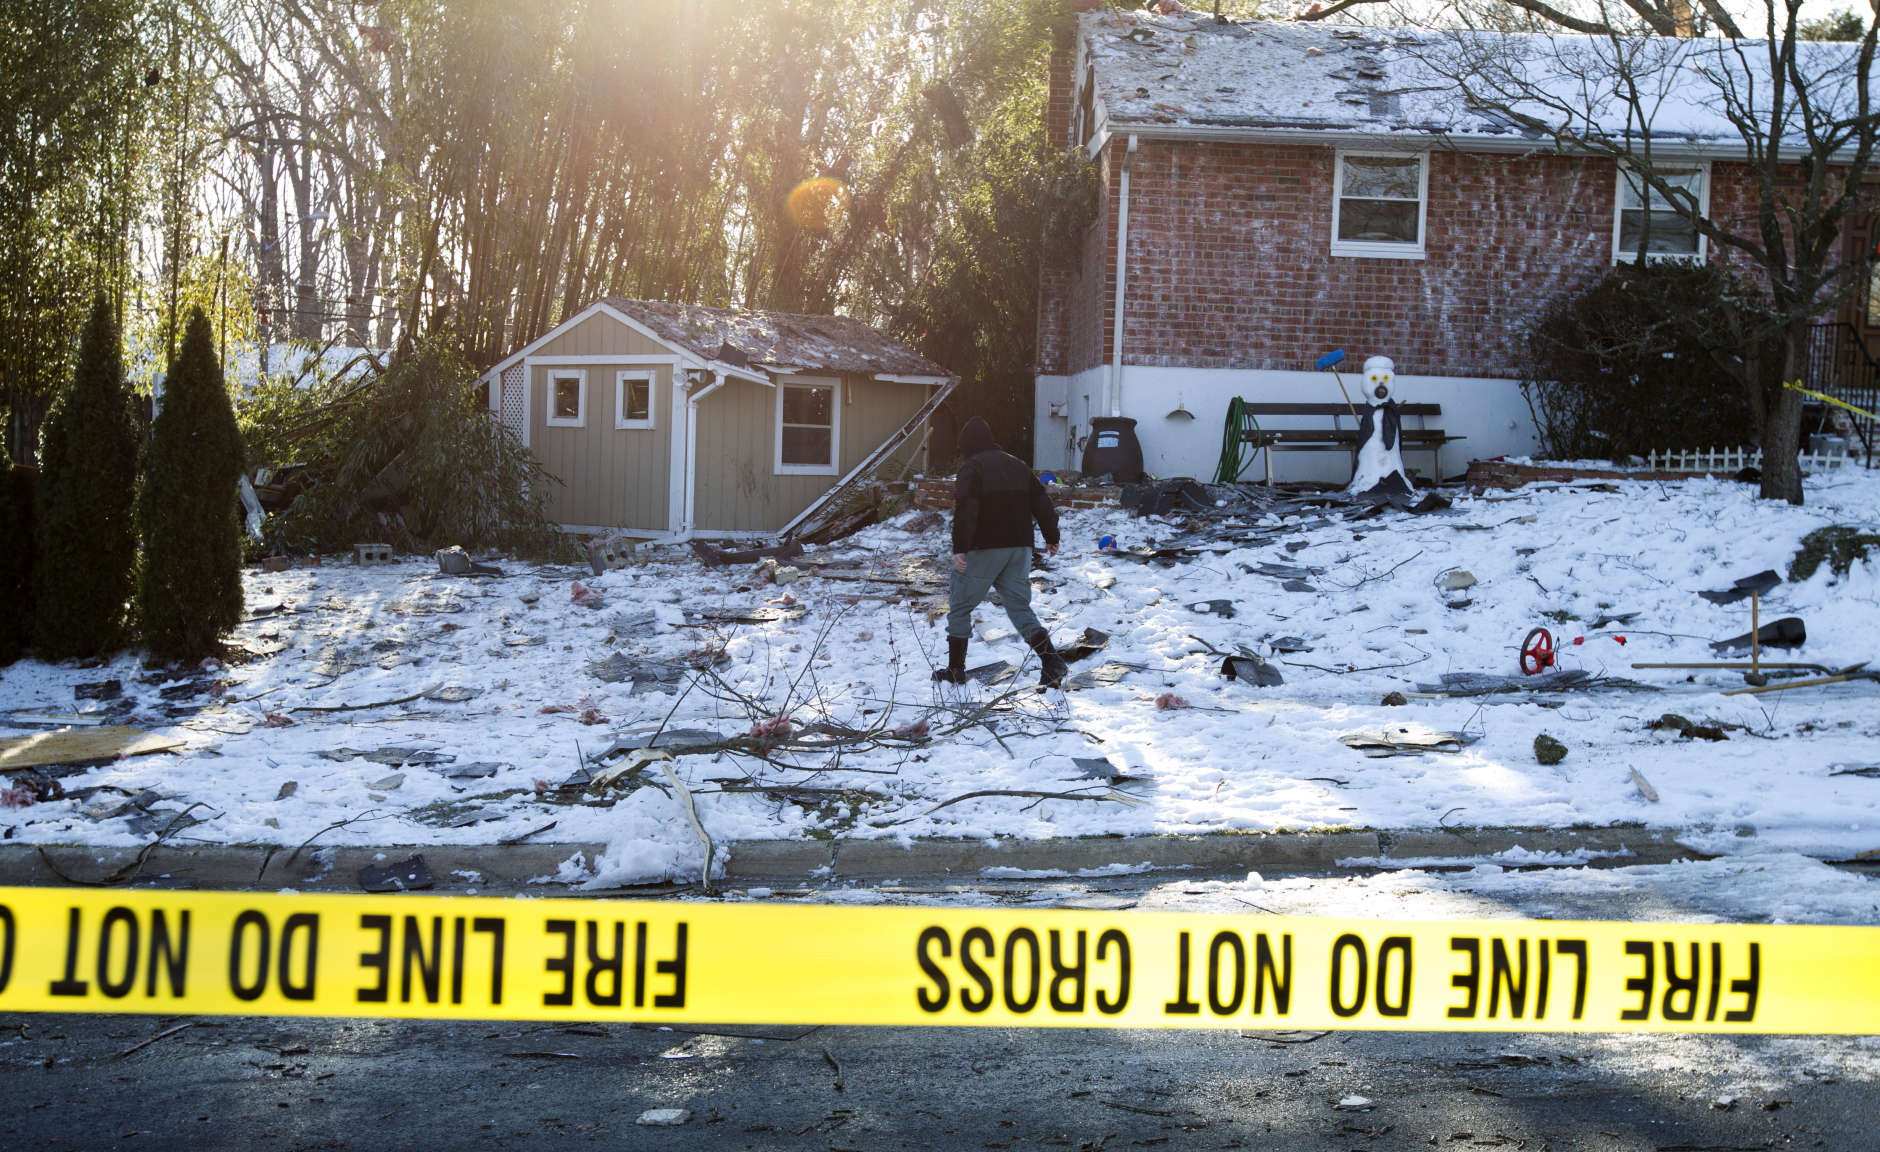 Montgomery County, Md. Police officers mark evidence near a house after an explosion in Rockville, Md., Friday, March 17, 2017. A house in a Maryland suburb of the nation's capital was leveled early Friday by a thunderous explosion heard for miles around, the blast shattering windows and causing other damage to several neighboring homes, authorities said. (AP Photo/Jose Luis Magana)